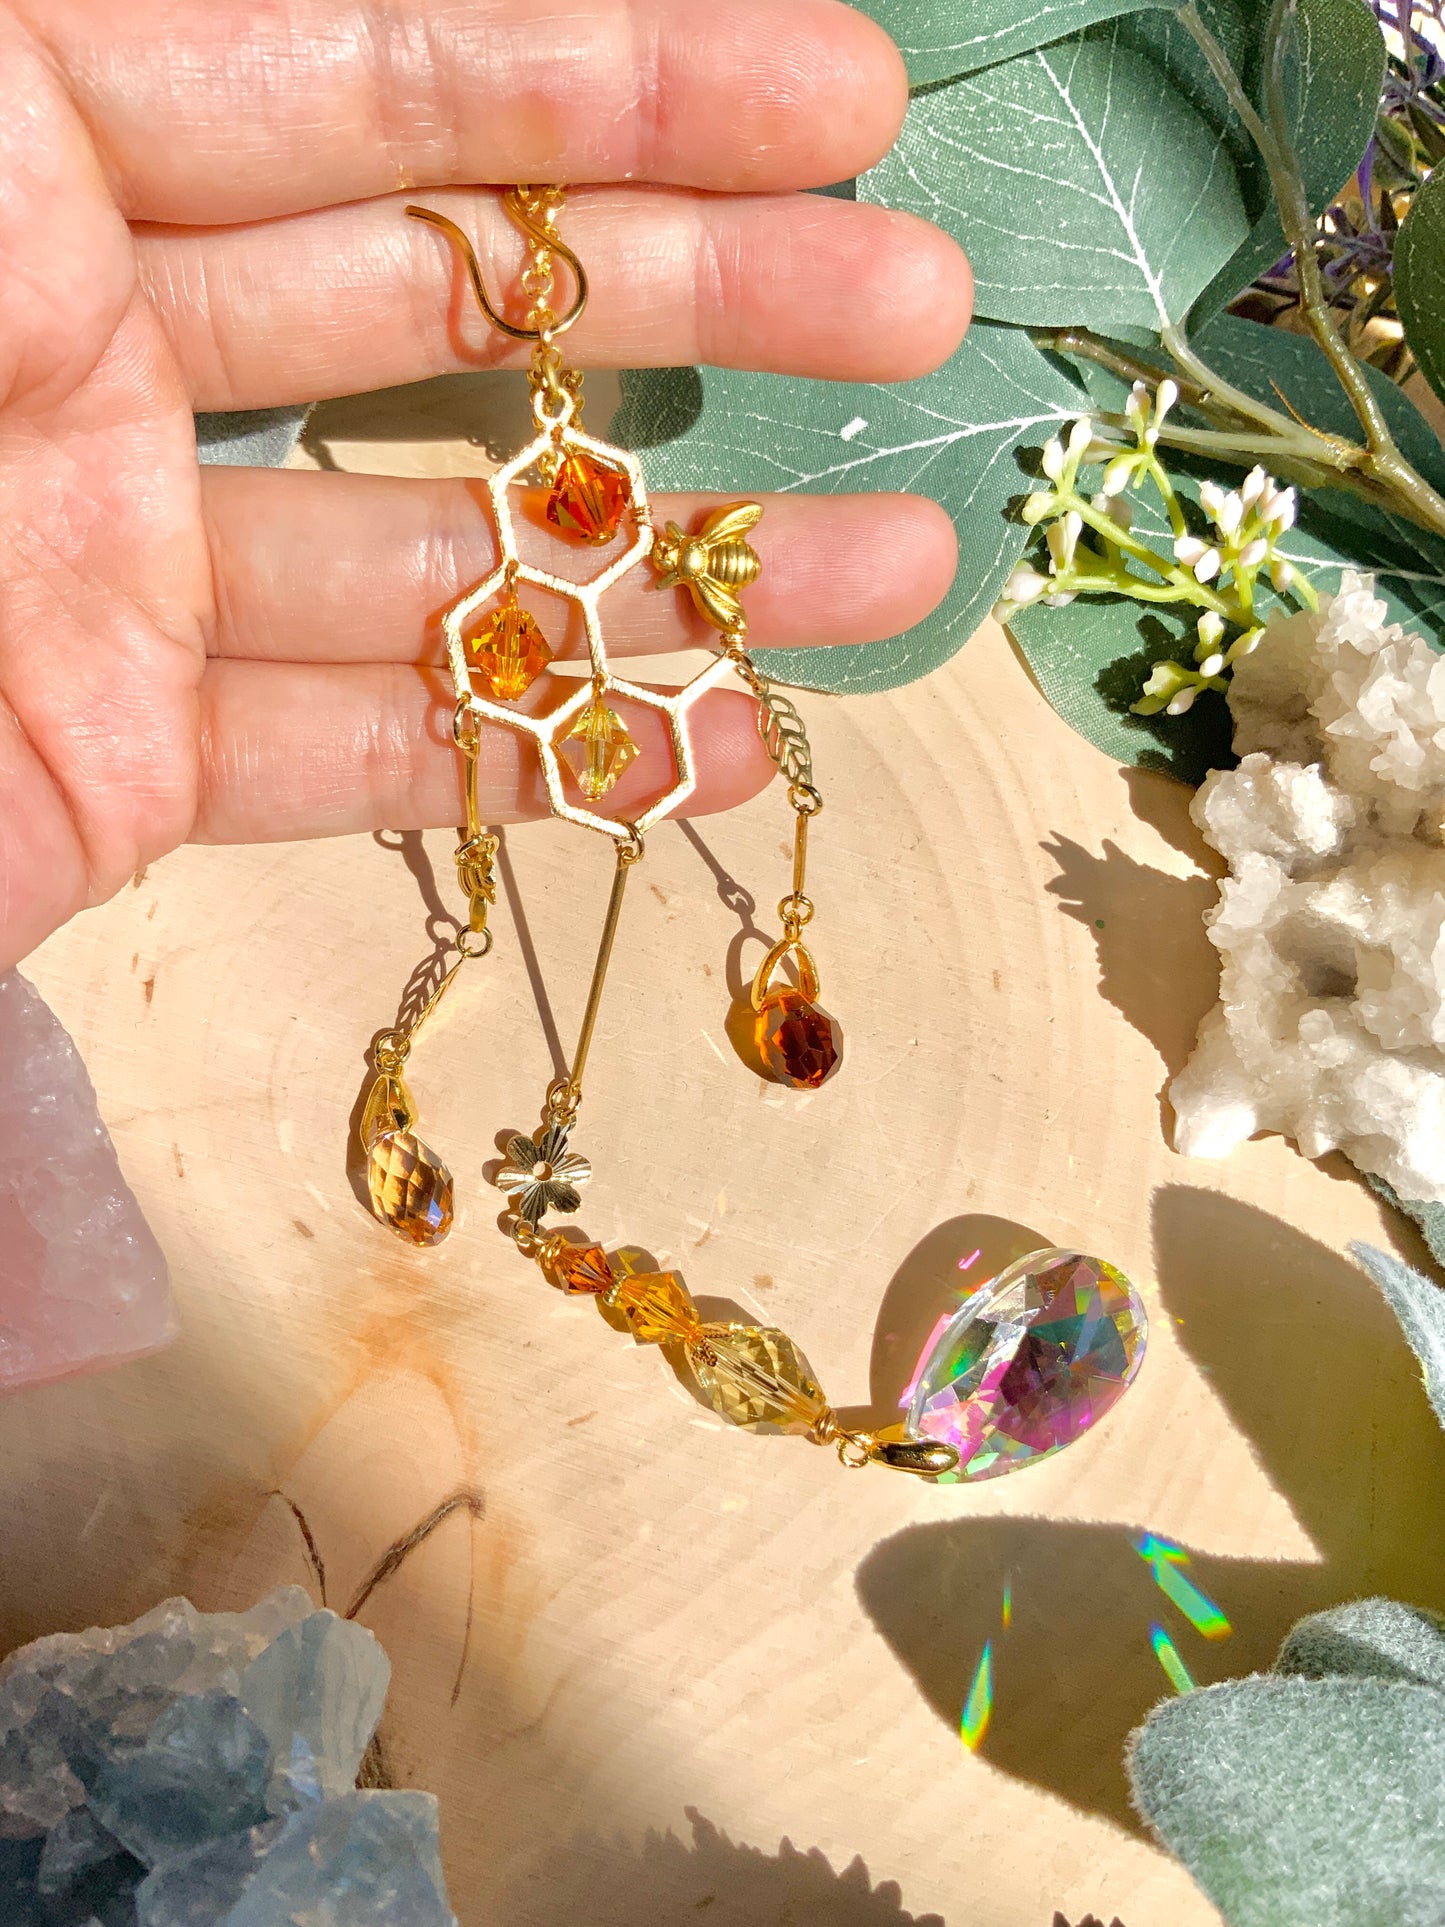 "Drops of Honey"— 18k Gold-Plated Honeycomb Bee Car Charm with ombré Crystal prisms for car mirror accessories